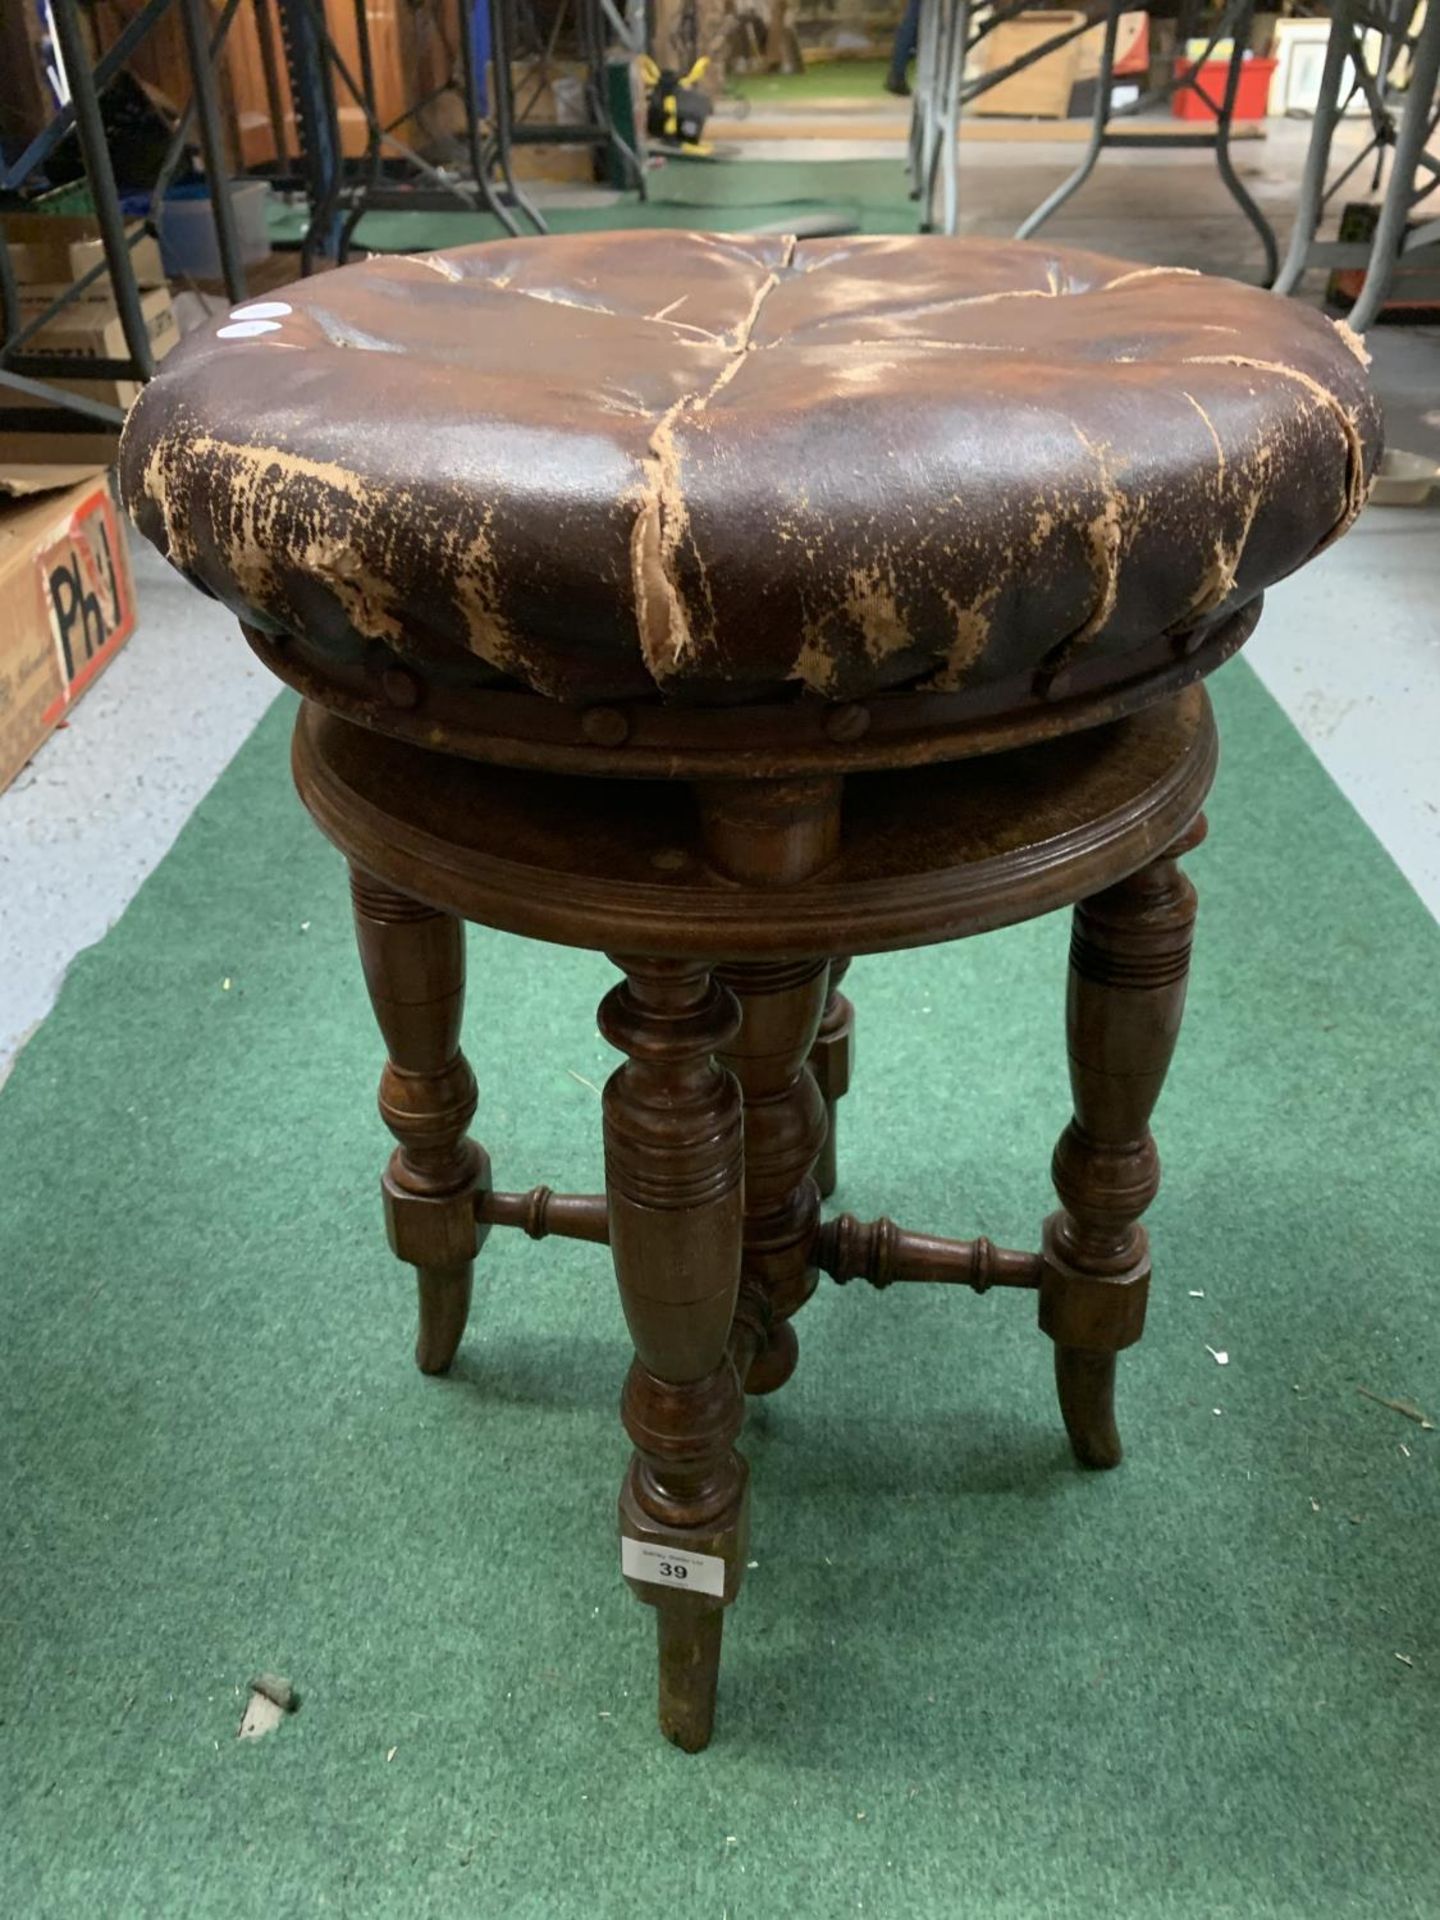 A VINTAGE ROUND LEATHER BUTTONED PIANO STOOL - Image 2 of 6